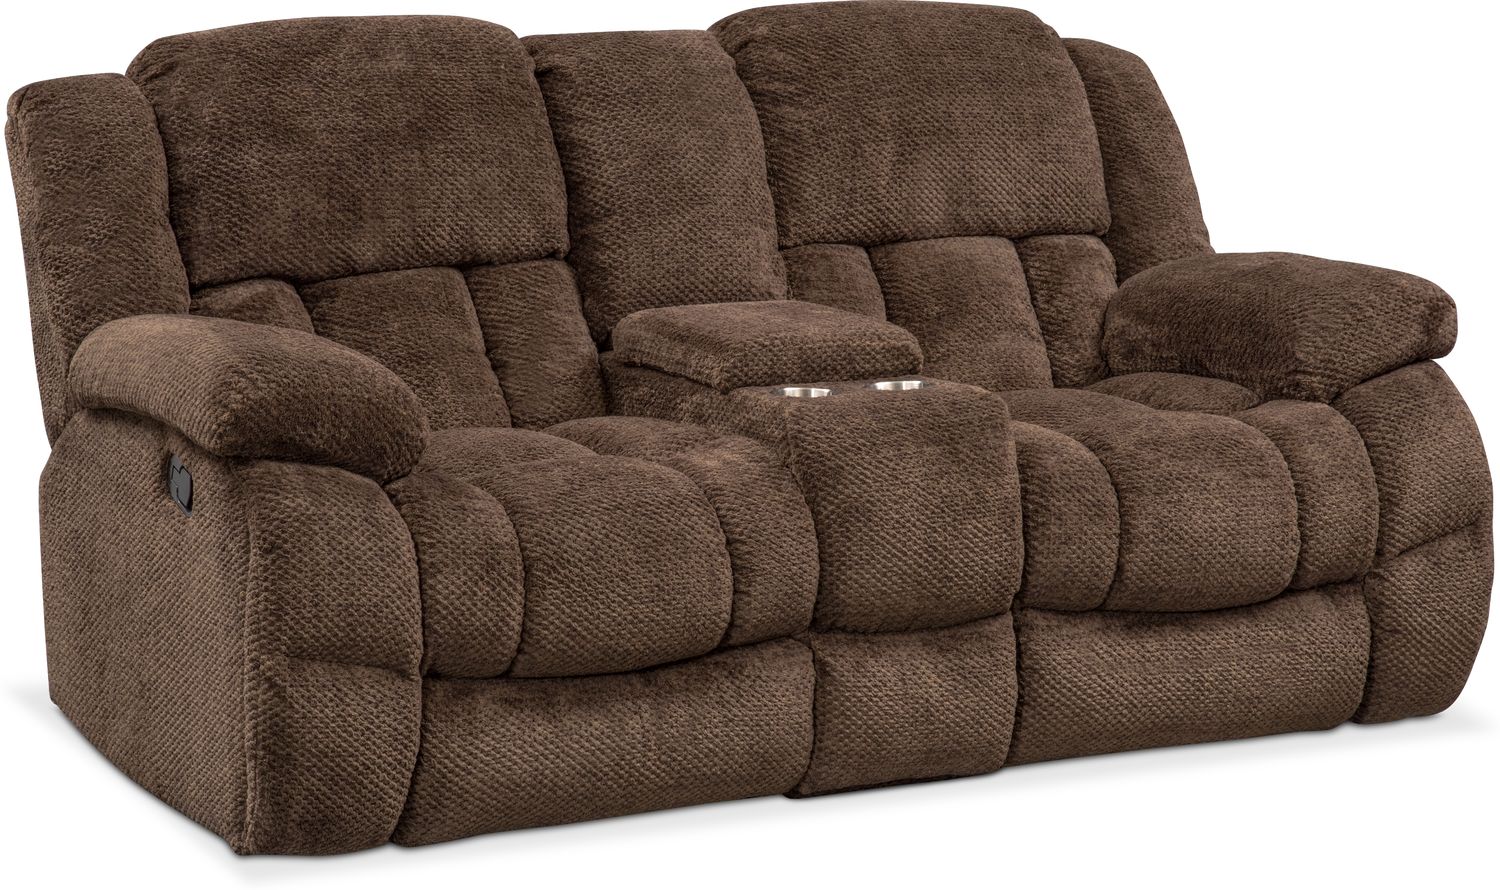 Turbo Reclining Loveseat with Console | Value City Furniture and